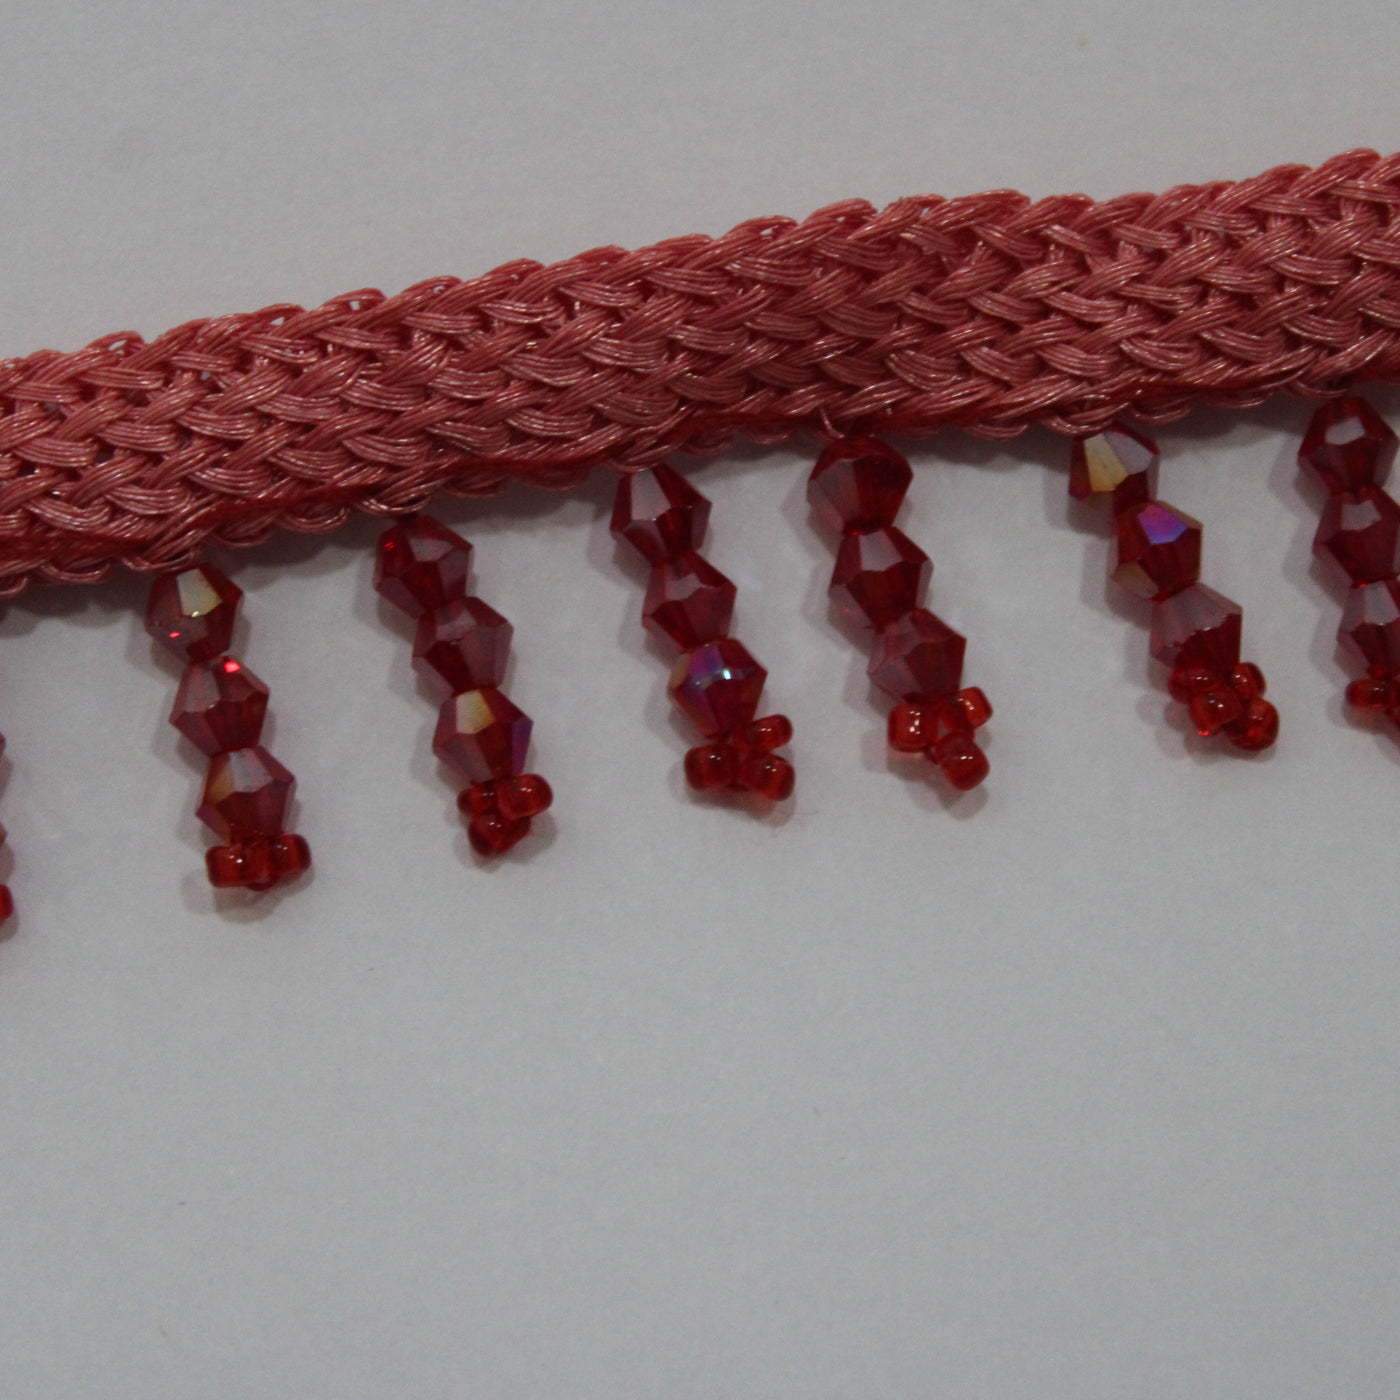 Red Crystal Beads Work Fringe Lace (Wholesale)